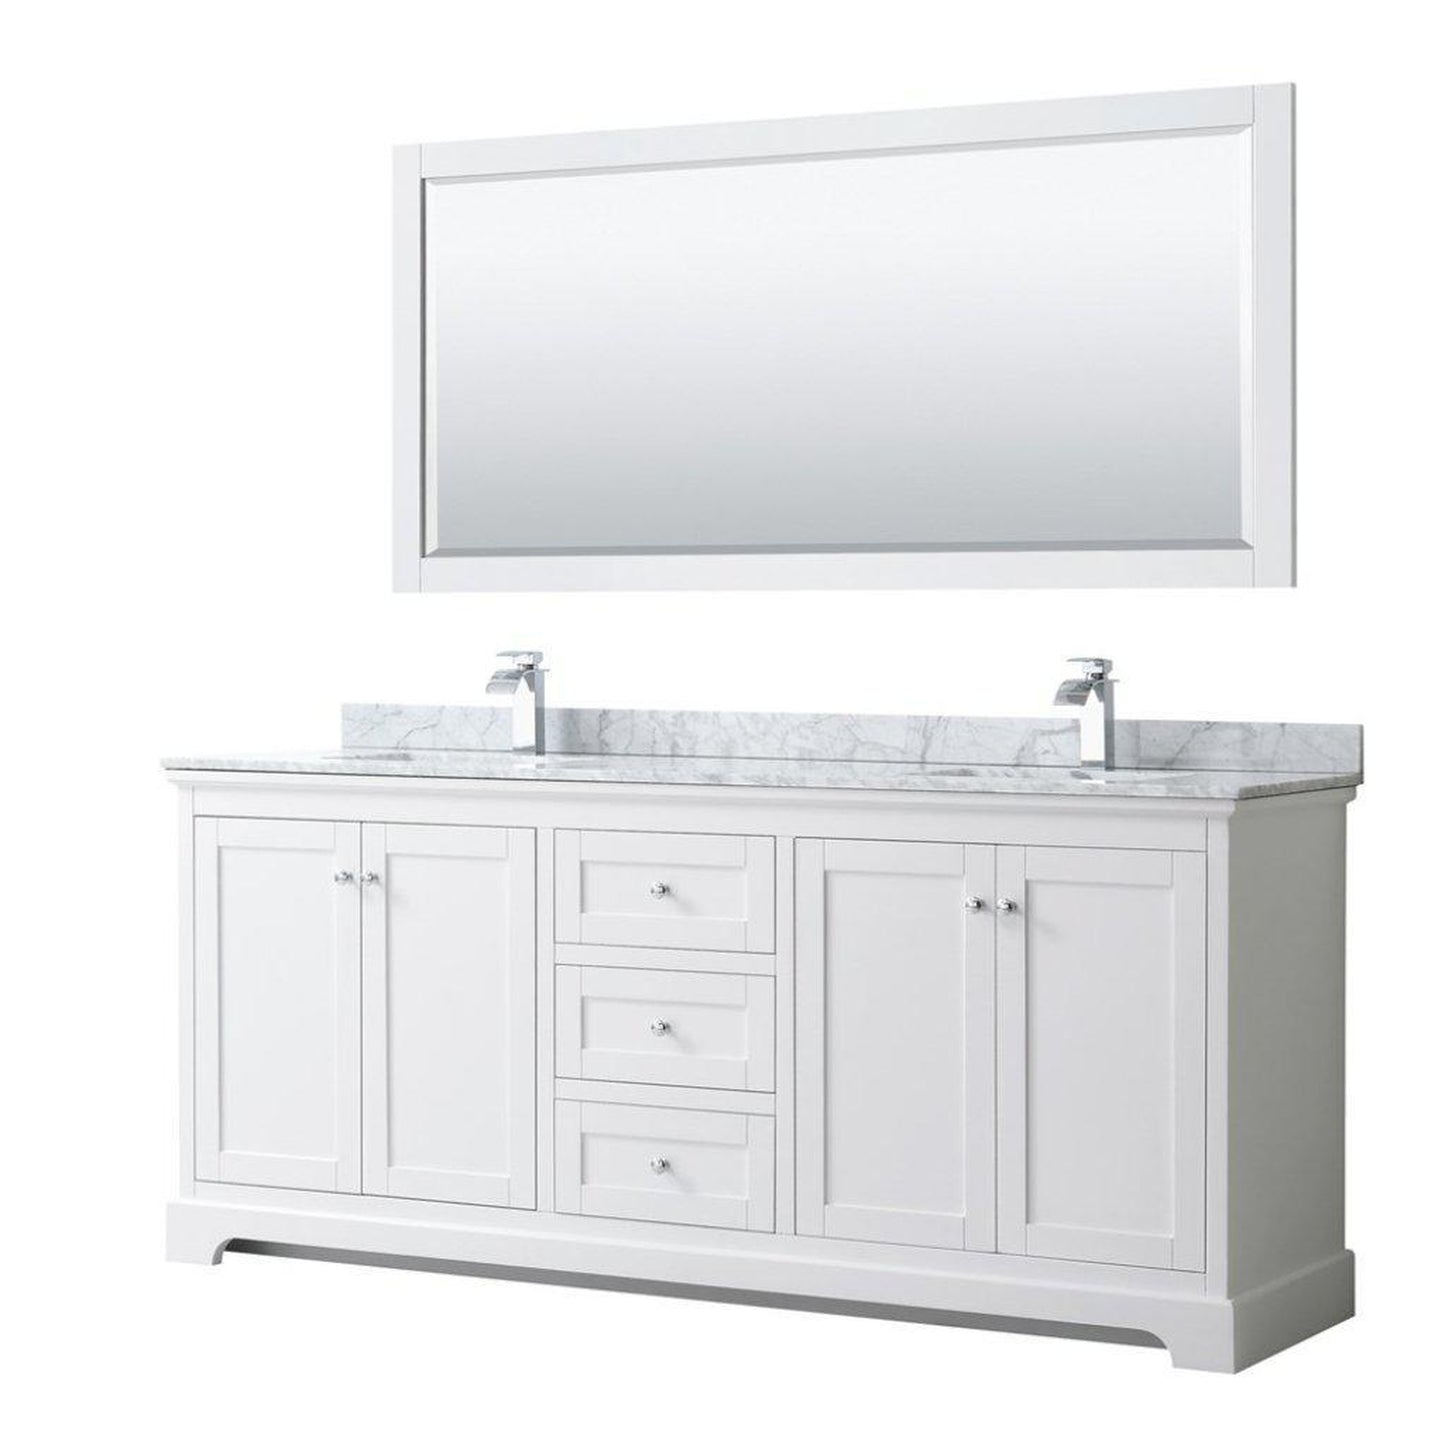 Wyndham Collection Avery 80" White Double Bathroom Vanity Set, White Carrara Marble Countertop With 1-Hole Faucet, Square Sink, 70" Mirror, Polished Chrome Trims